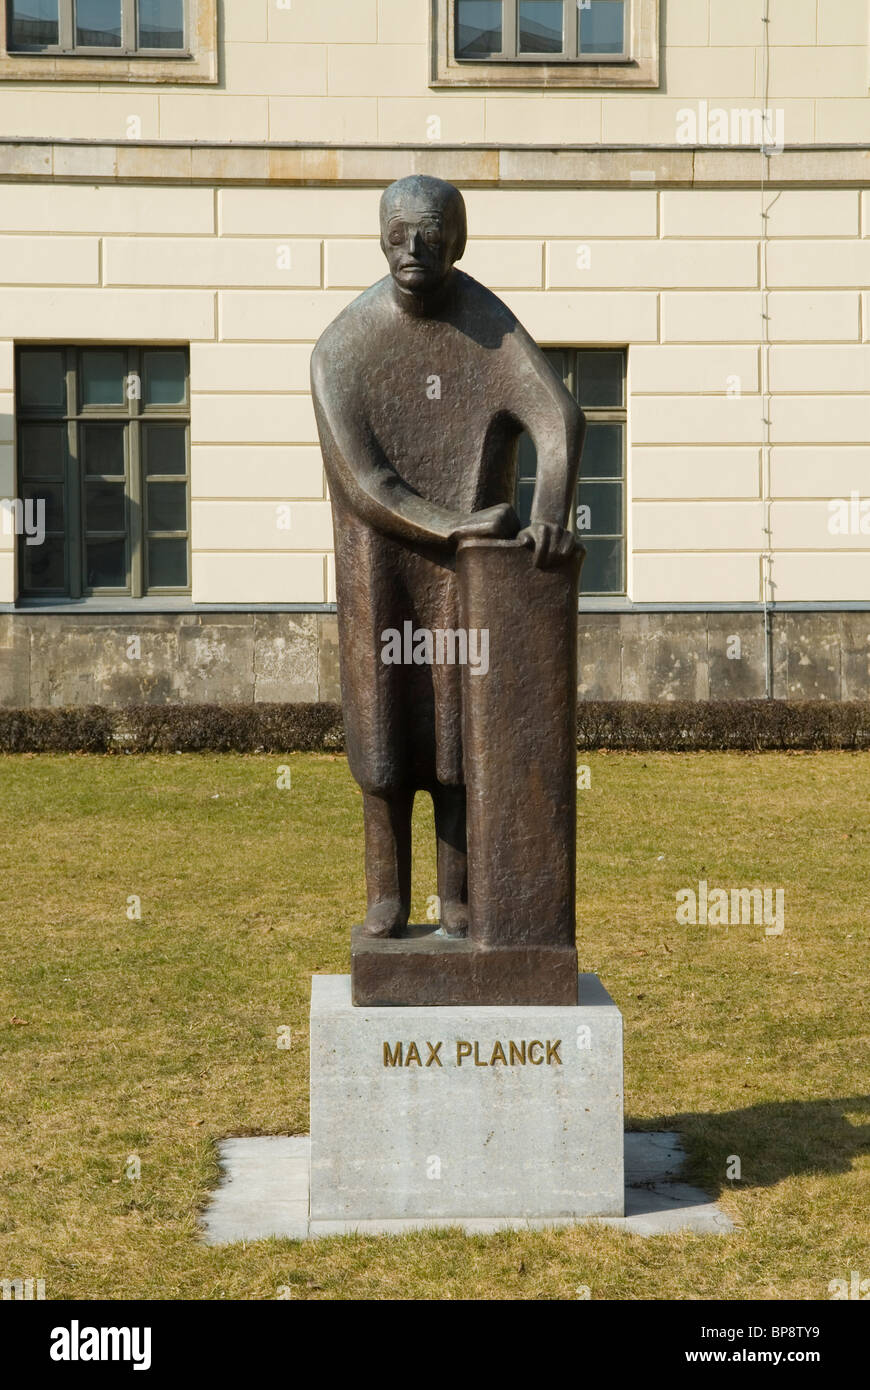 Statue of Max Planck outside The Humboldt University of Berlin Germany Stock Photo